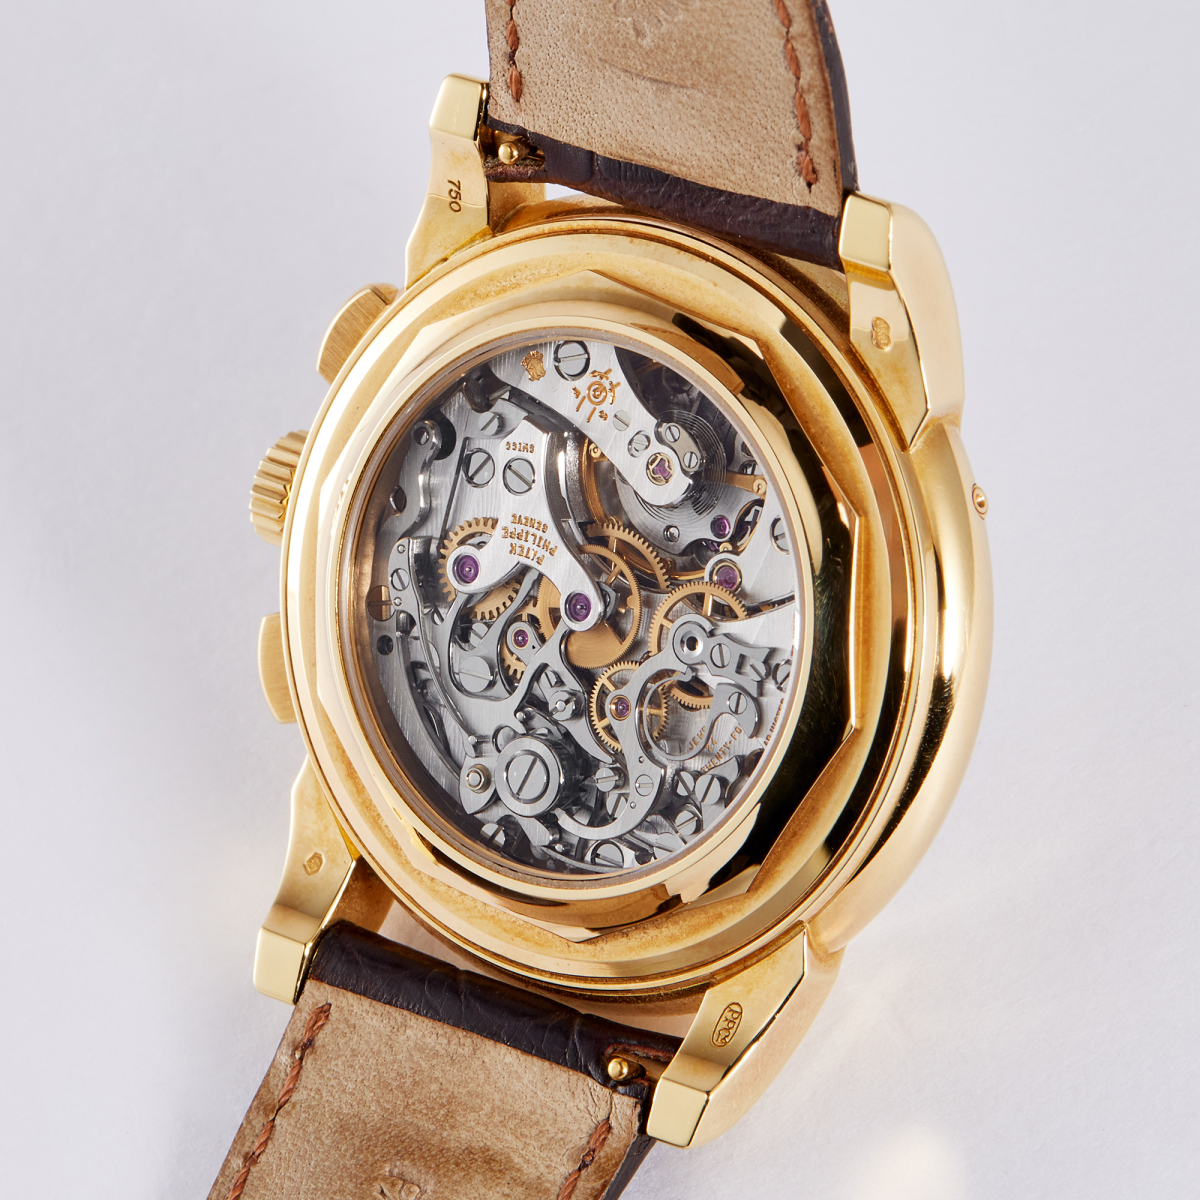 Grand Complications Perpetual Calendar Chronograph Yellow Gold White Dial